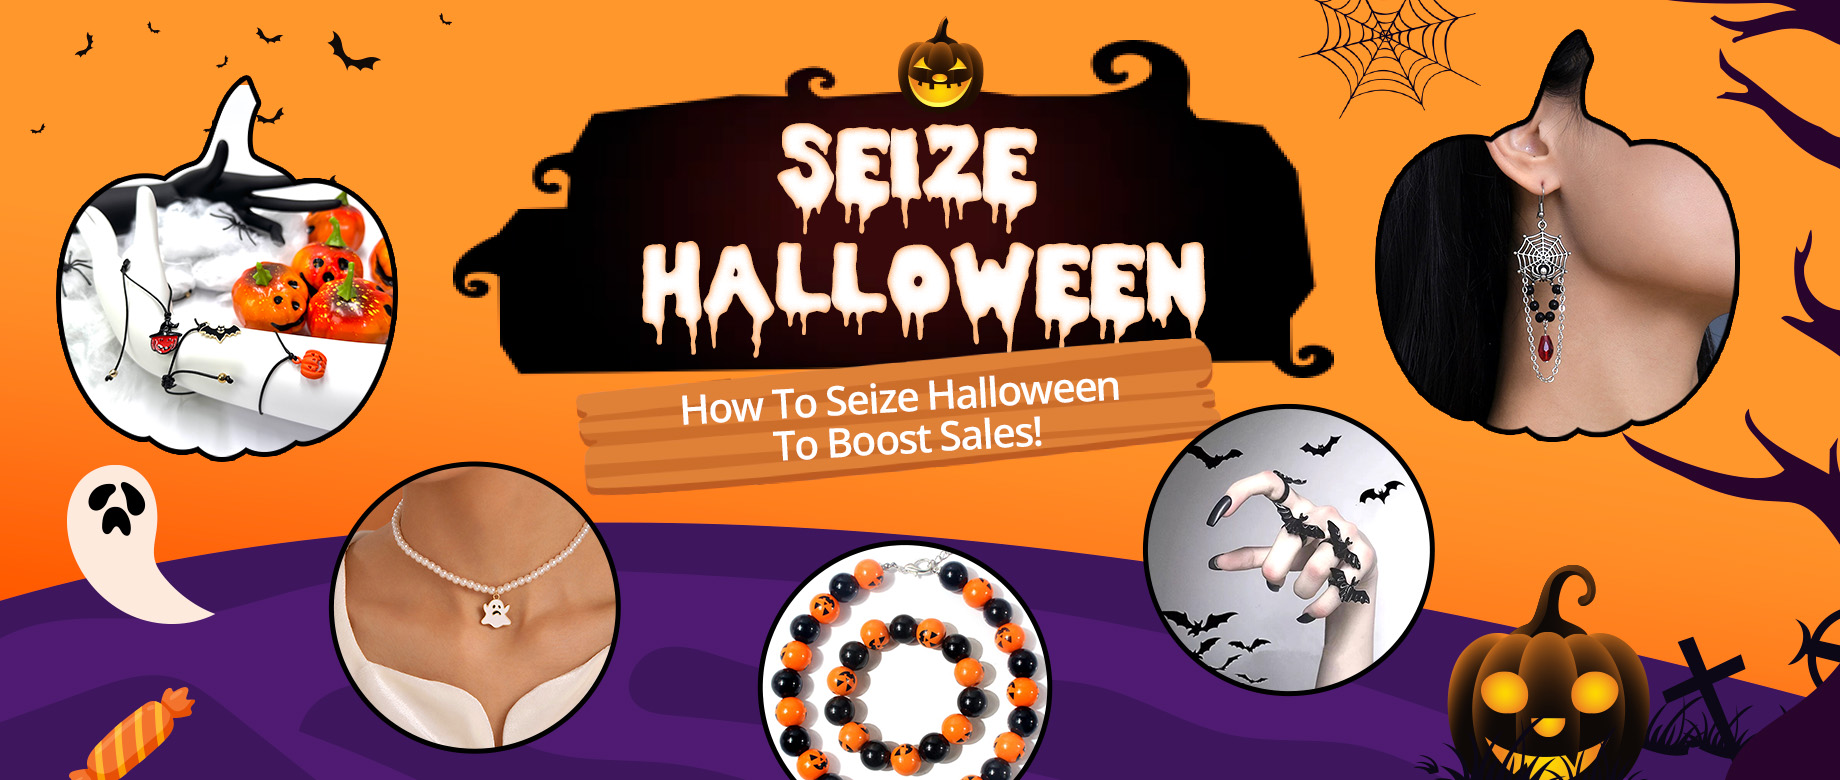 HOW TO SEIZE HALLOWEEN TO BOOST SALES!